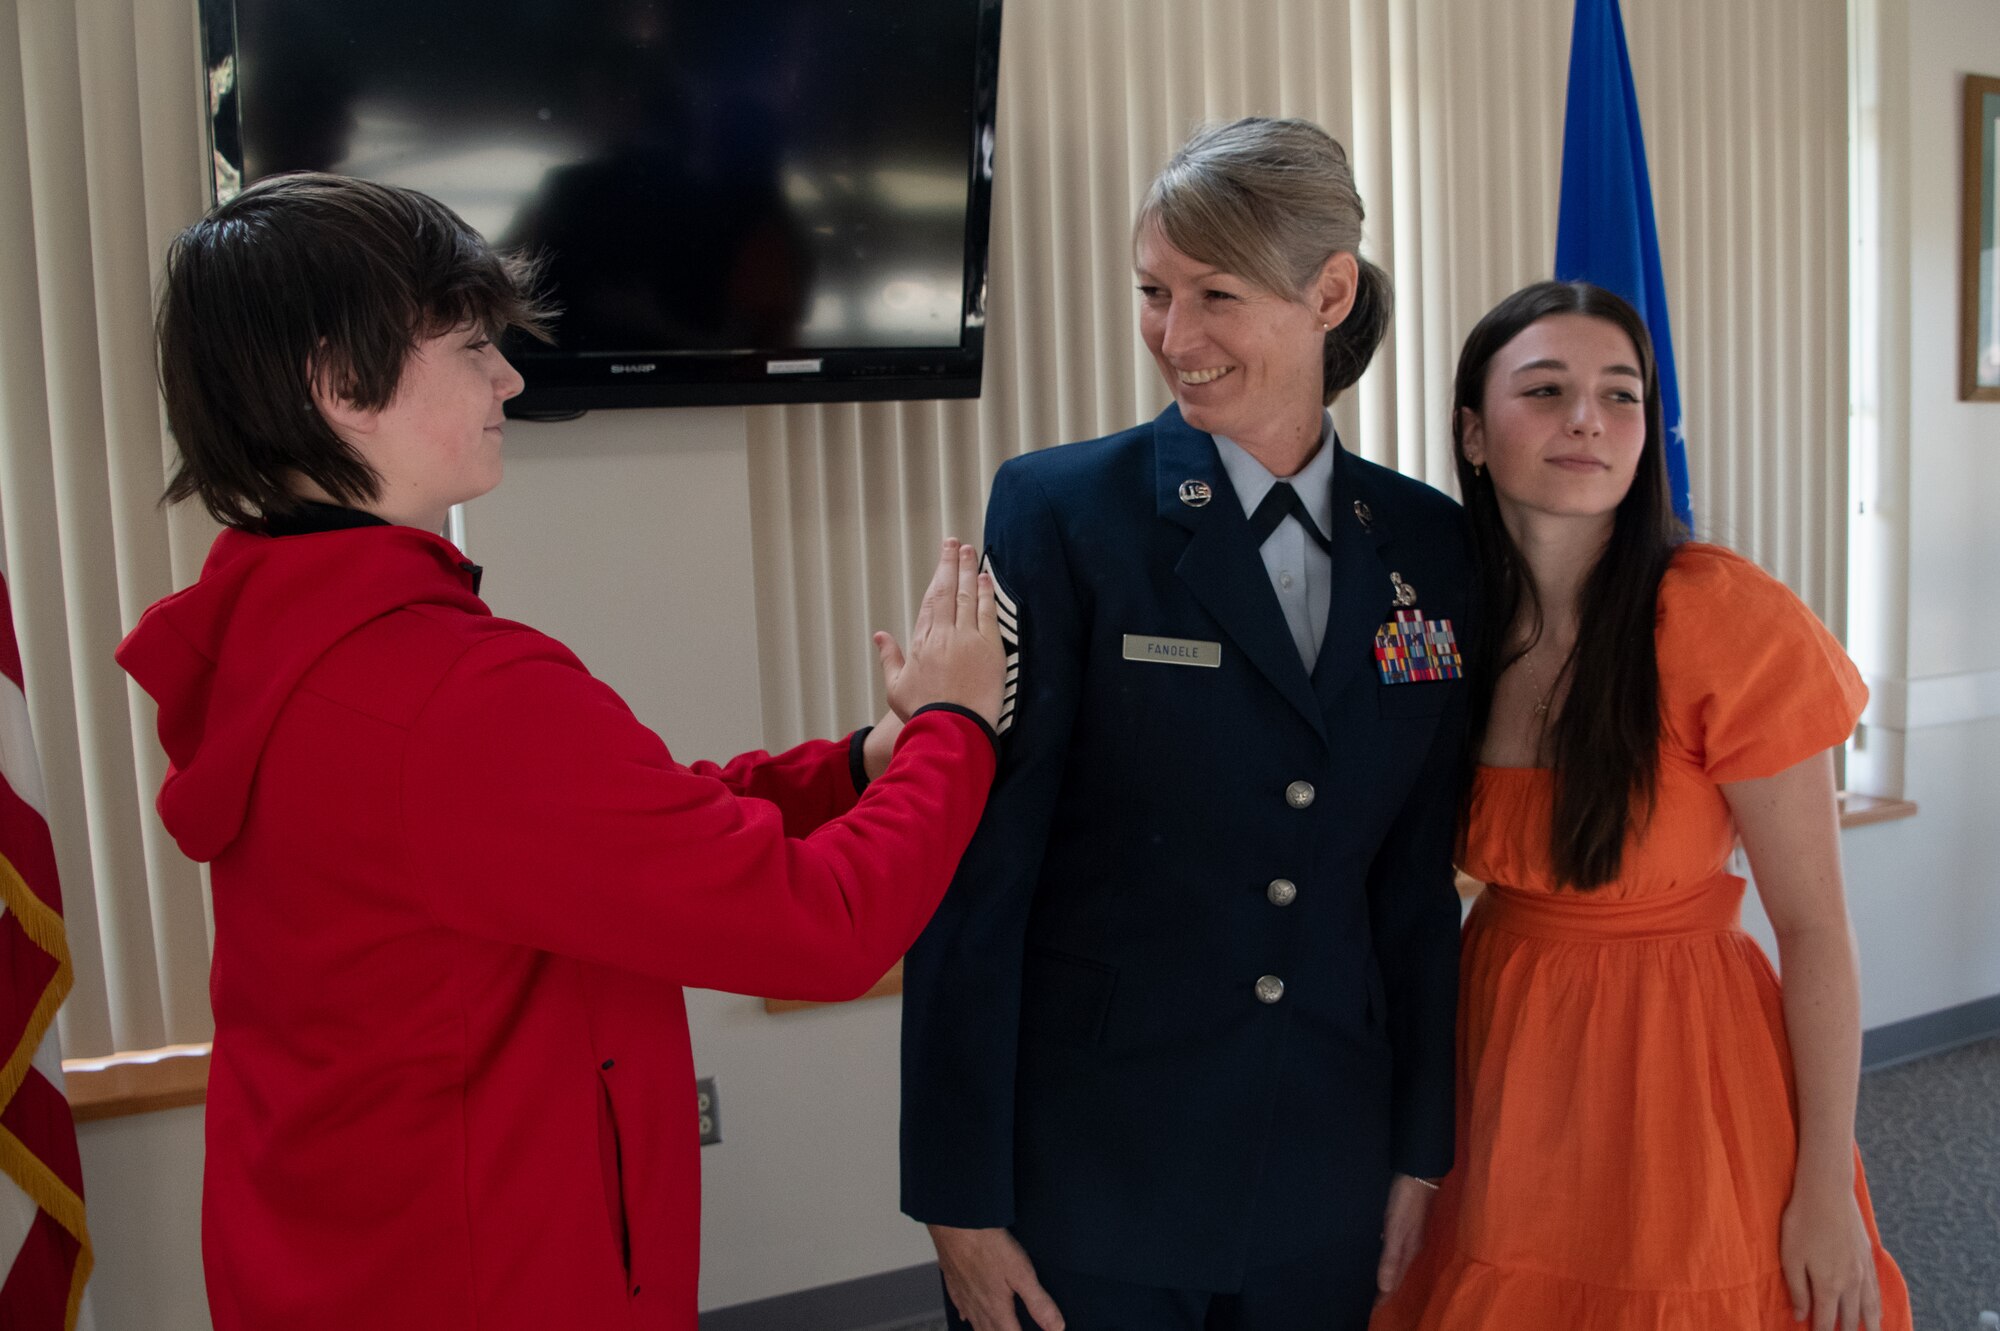 Chief Master Sgt. Jennifer Fanoele, 131st Bomb Wing Maintenance Operations Flight senior enlisted leader, receives her stripes from her son and her daughter at her promotion ceremony on the Royal Oak Golf Course, Knob Noster Missouri, April 1, 2023. Fanoele has served with distinction for 23 years and continues to be an asset to the Missouri Air National Guard. (U.S. Air National Guard photo by Senior Airman Kelly C. Ferguson)